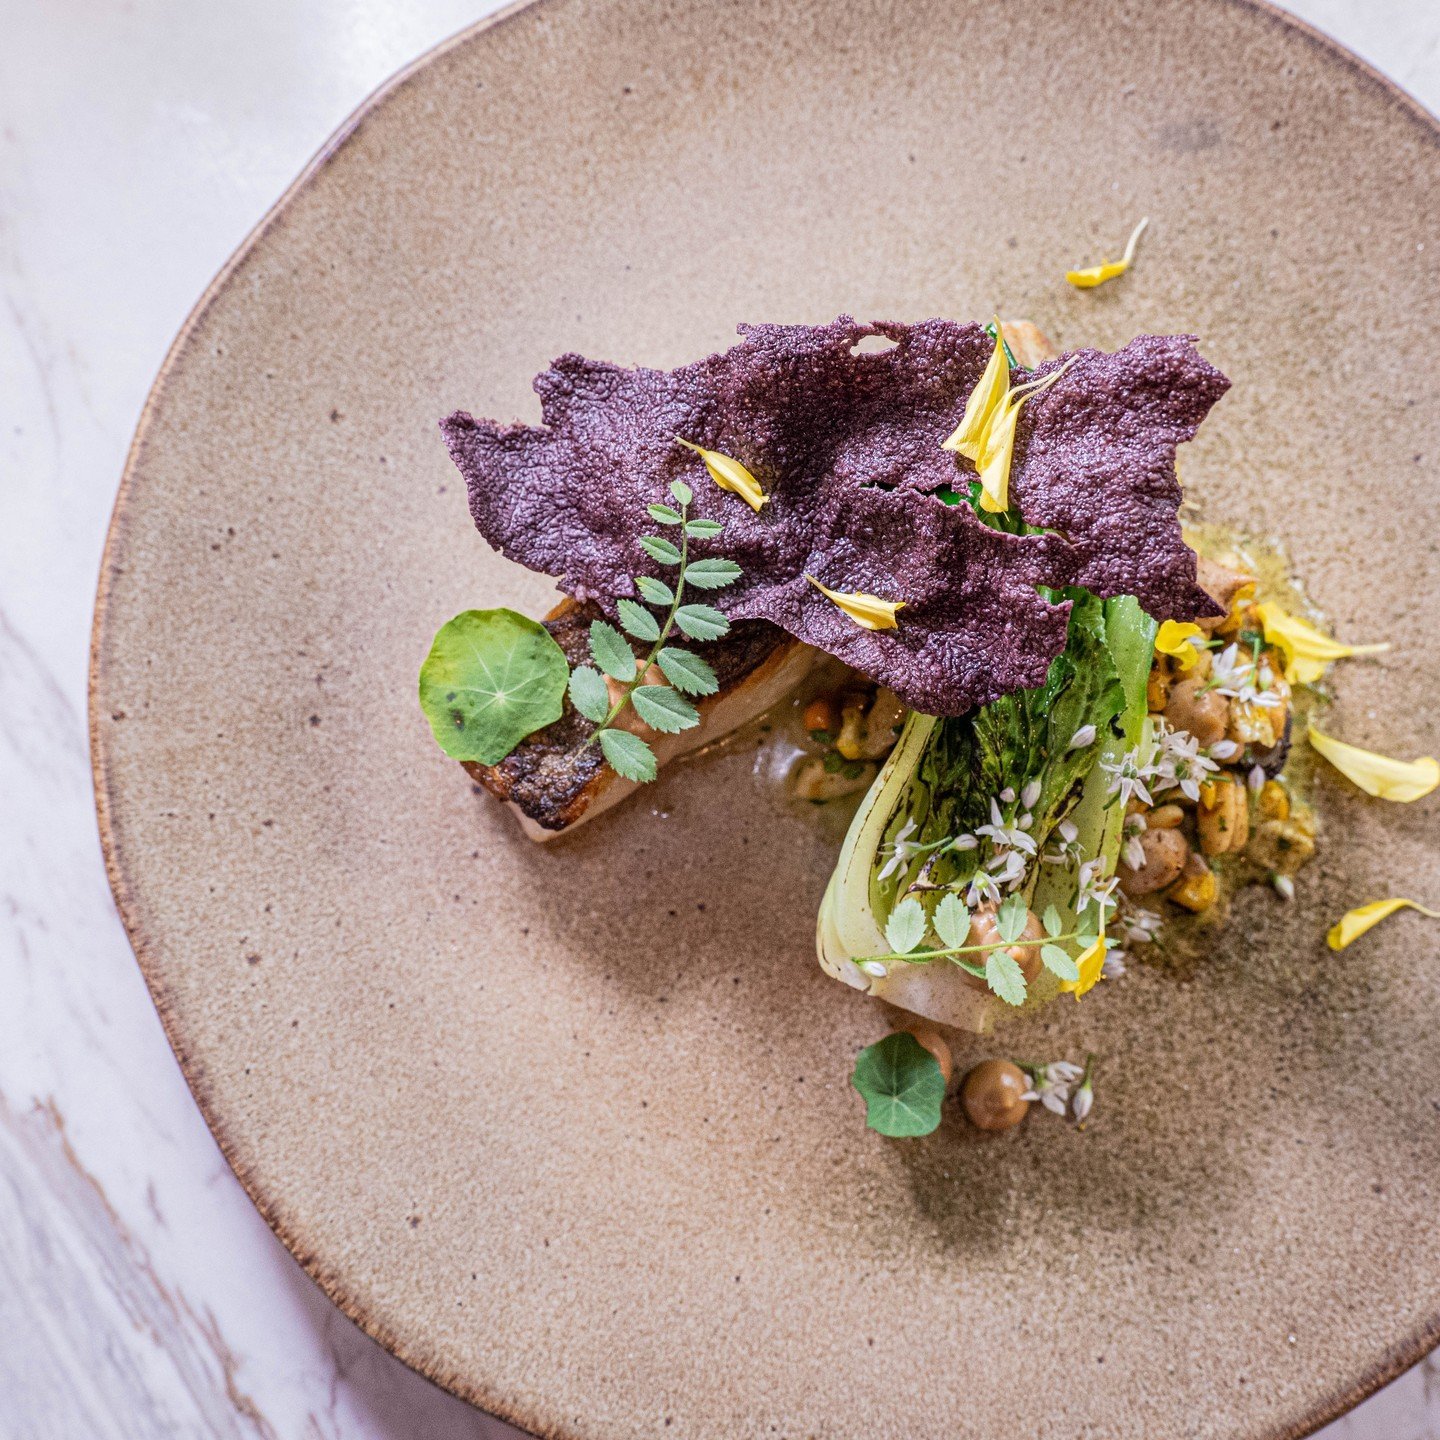 FRESH MARKET FISH

Smoked mussels, sweet corn succotash, cashew butter, tom yum, bok choi

Book your table online (link in bio), email reception@thechefstable.co.za or phone 031 001 0200.

@eatoutguide 
@jhp_gourmet_guide 
@sebastian.nico.photography